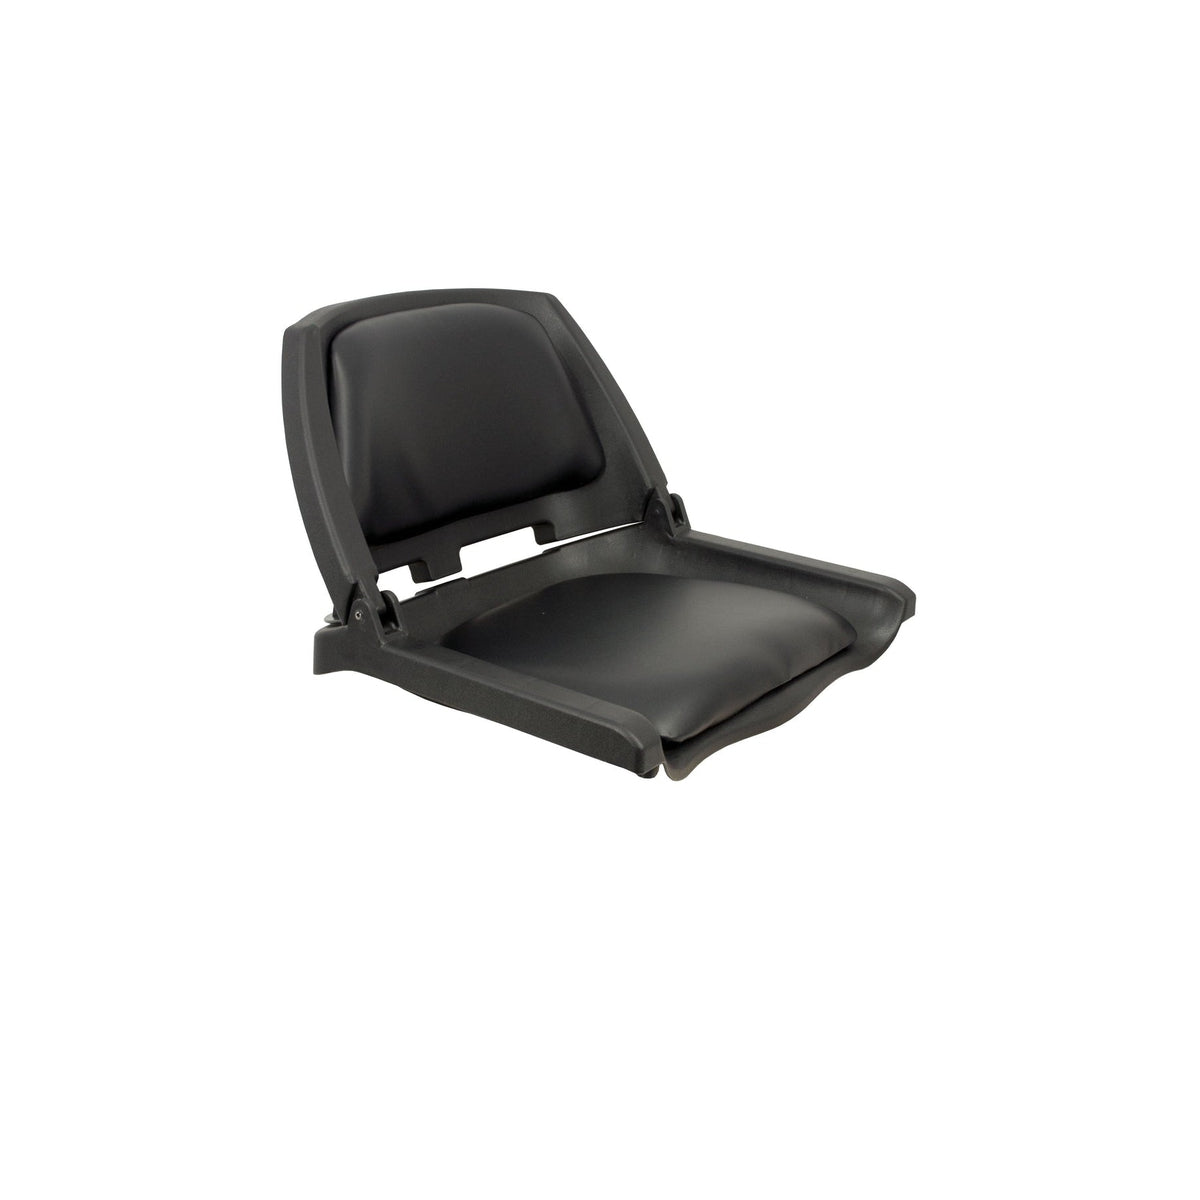 Springfield Not Qualified for Free Shipping Springfield Traveler Folding Seat Black with Black Cushion #1061103-C